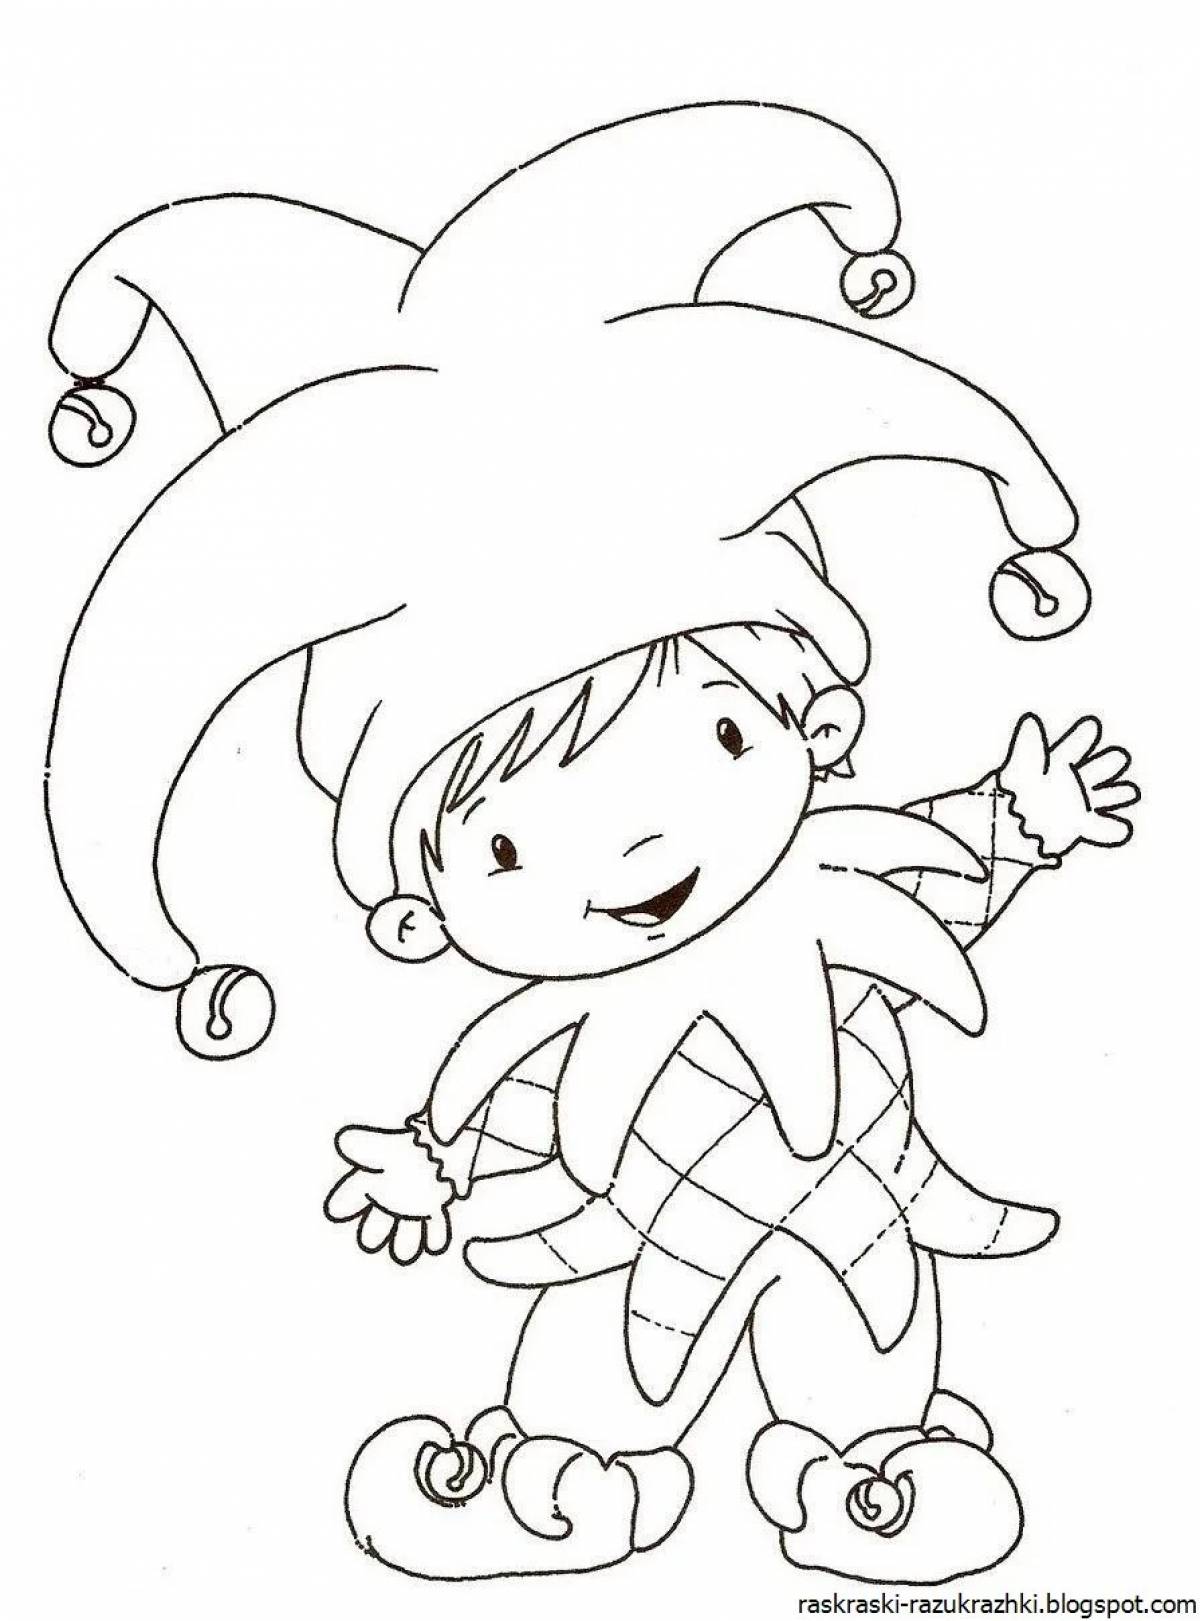 Incredible jester coloring book for kids